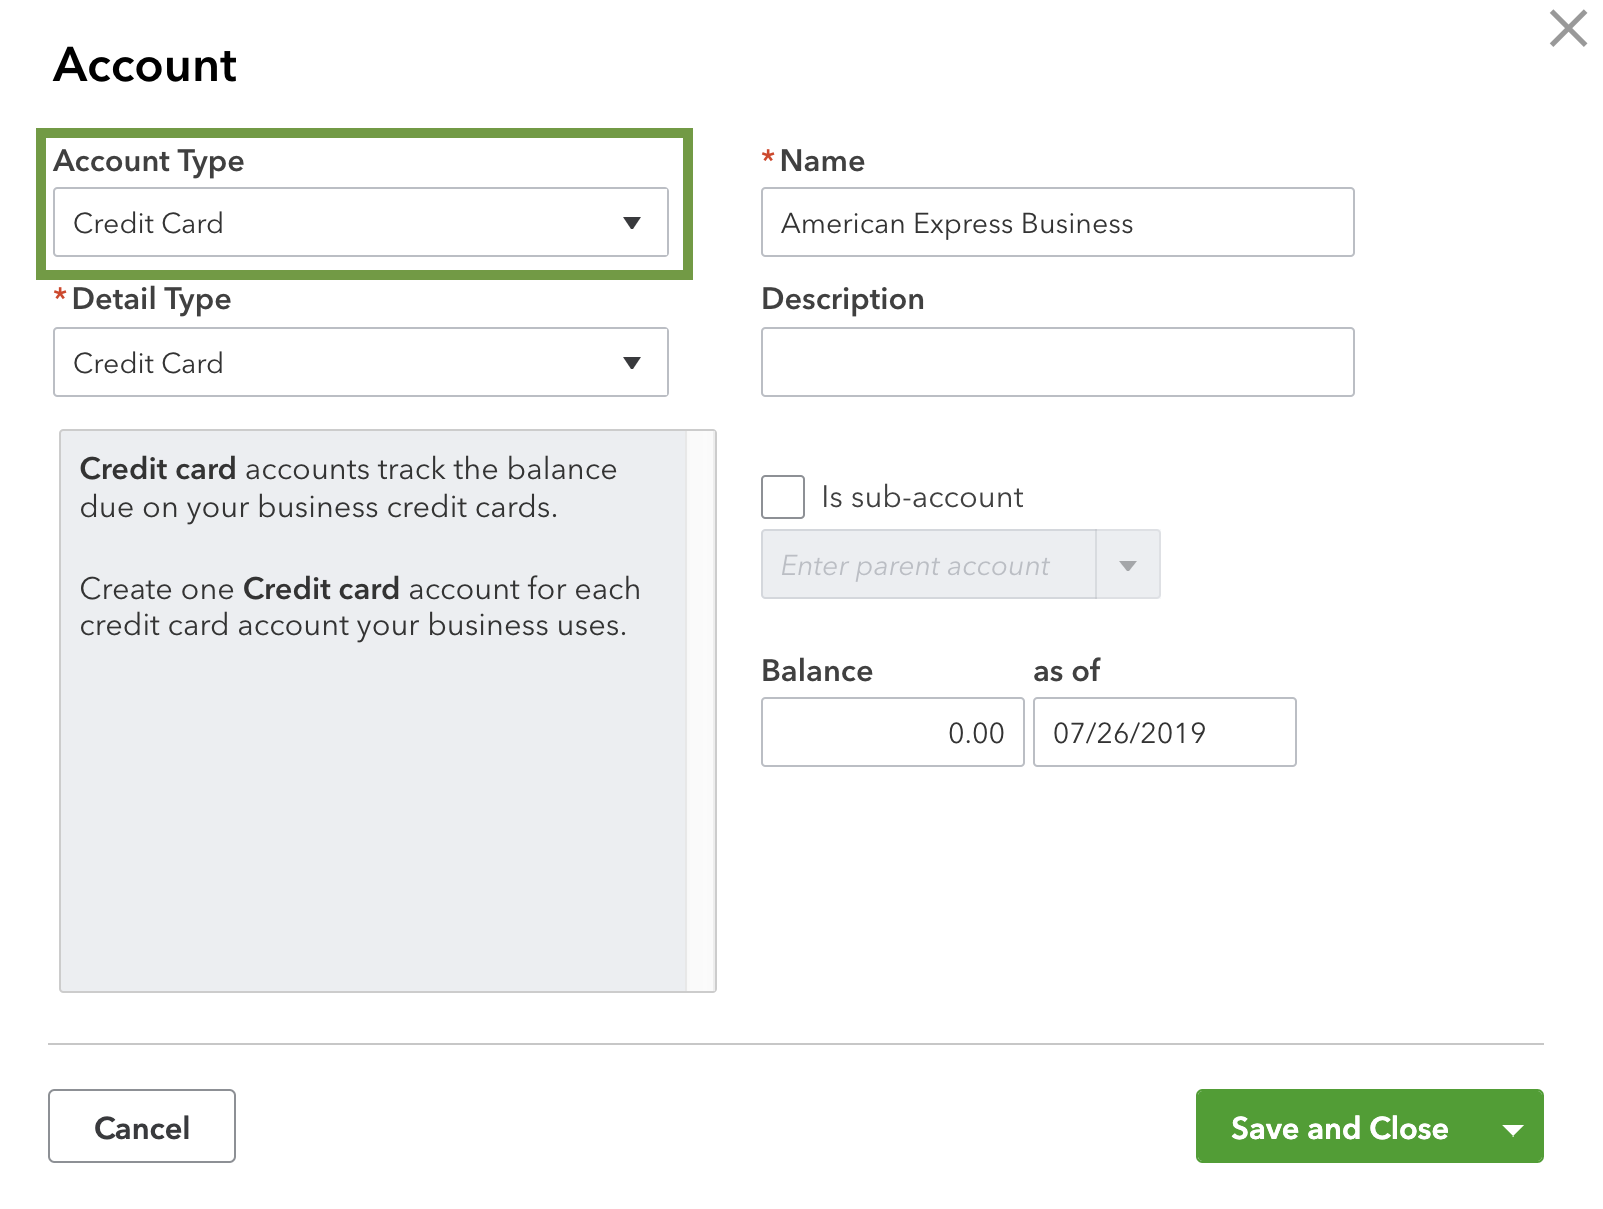 This is the create a new account window on your chart of accounts.